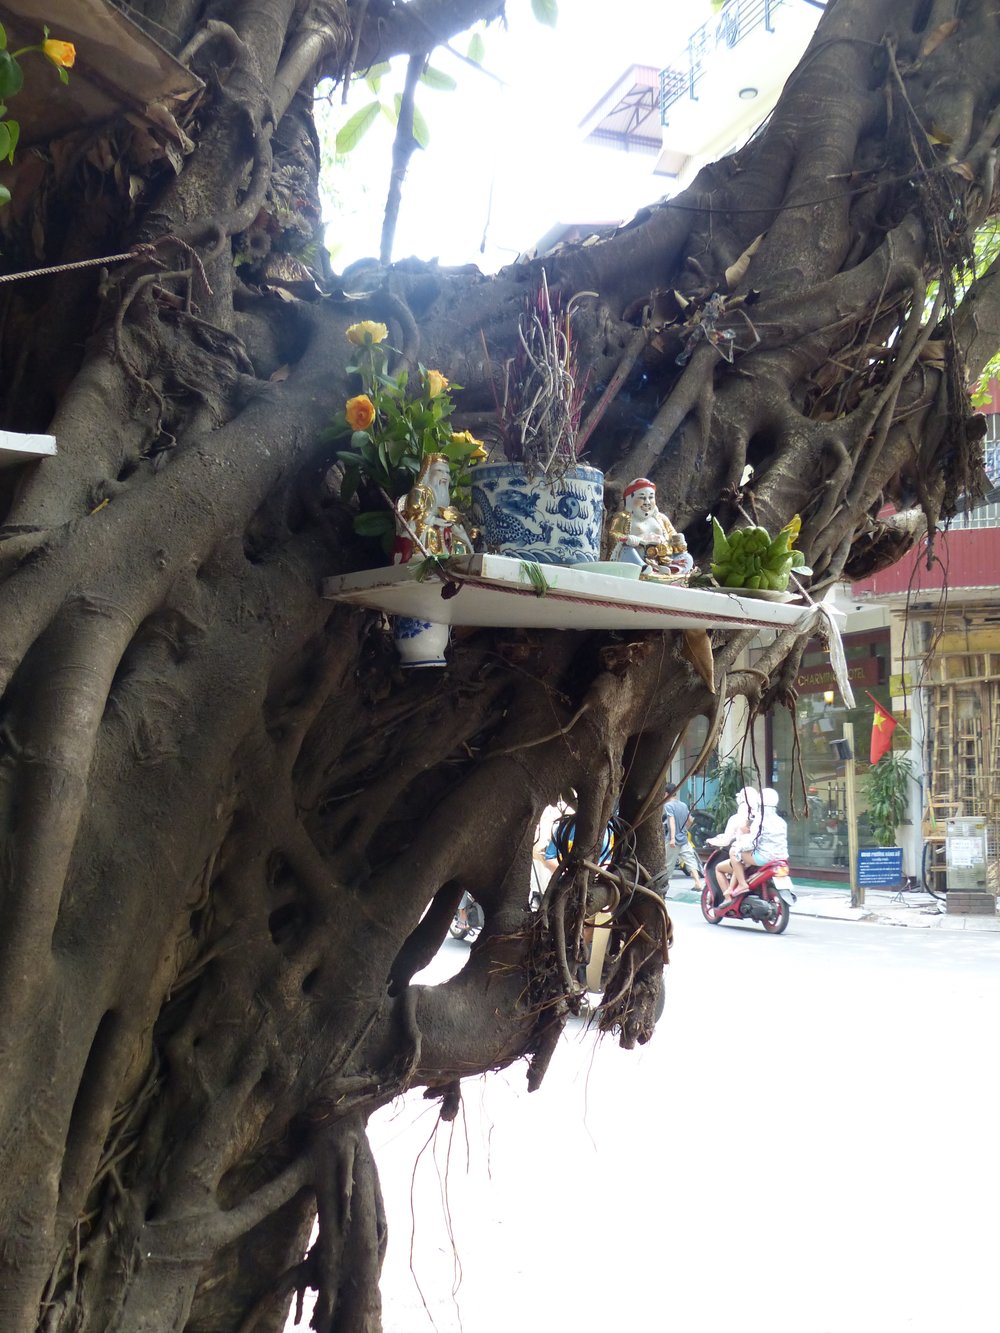 Why is there a shrine in the banyan tree?